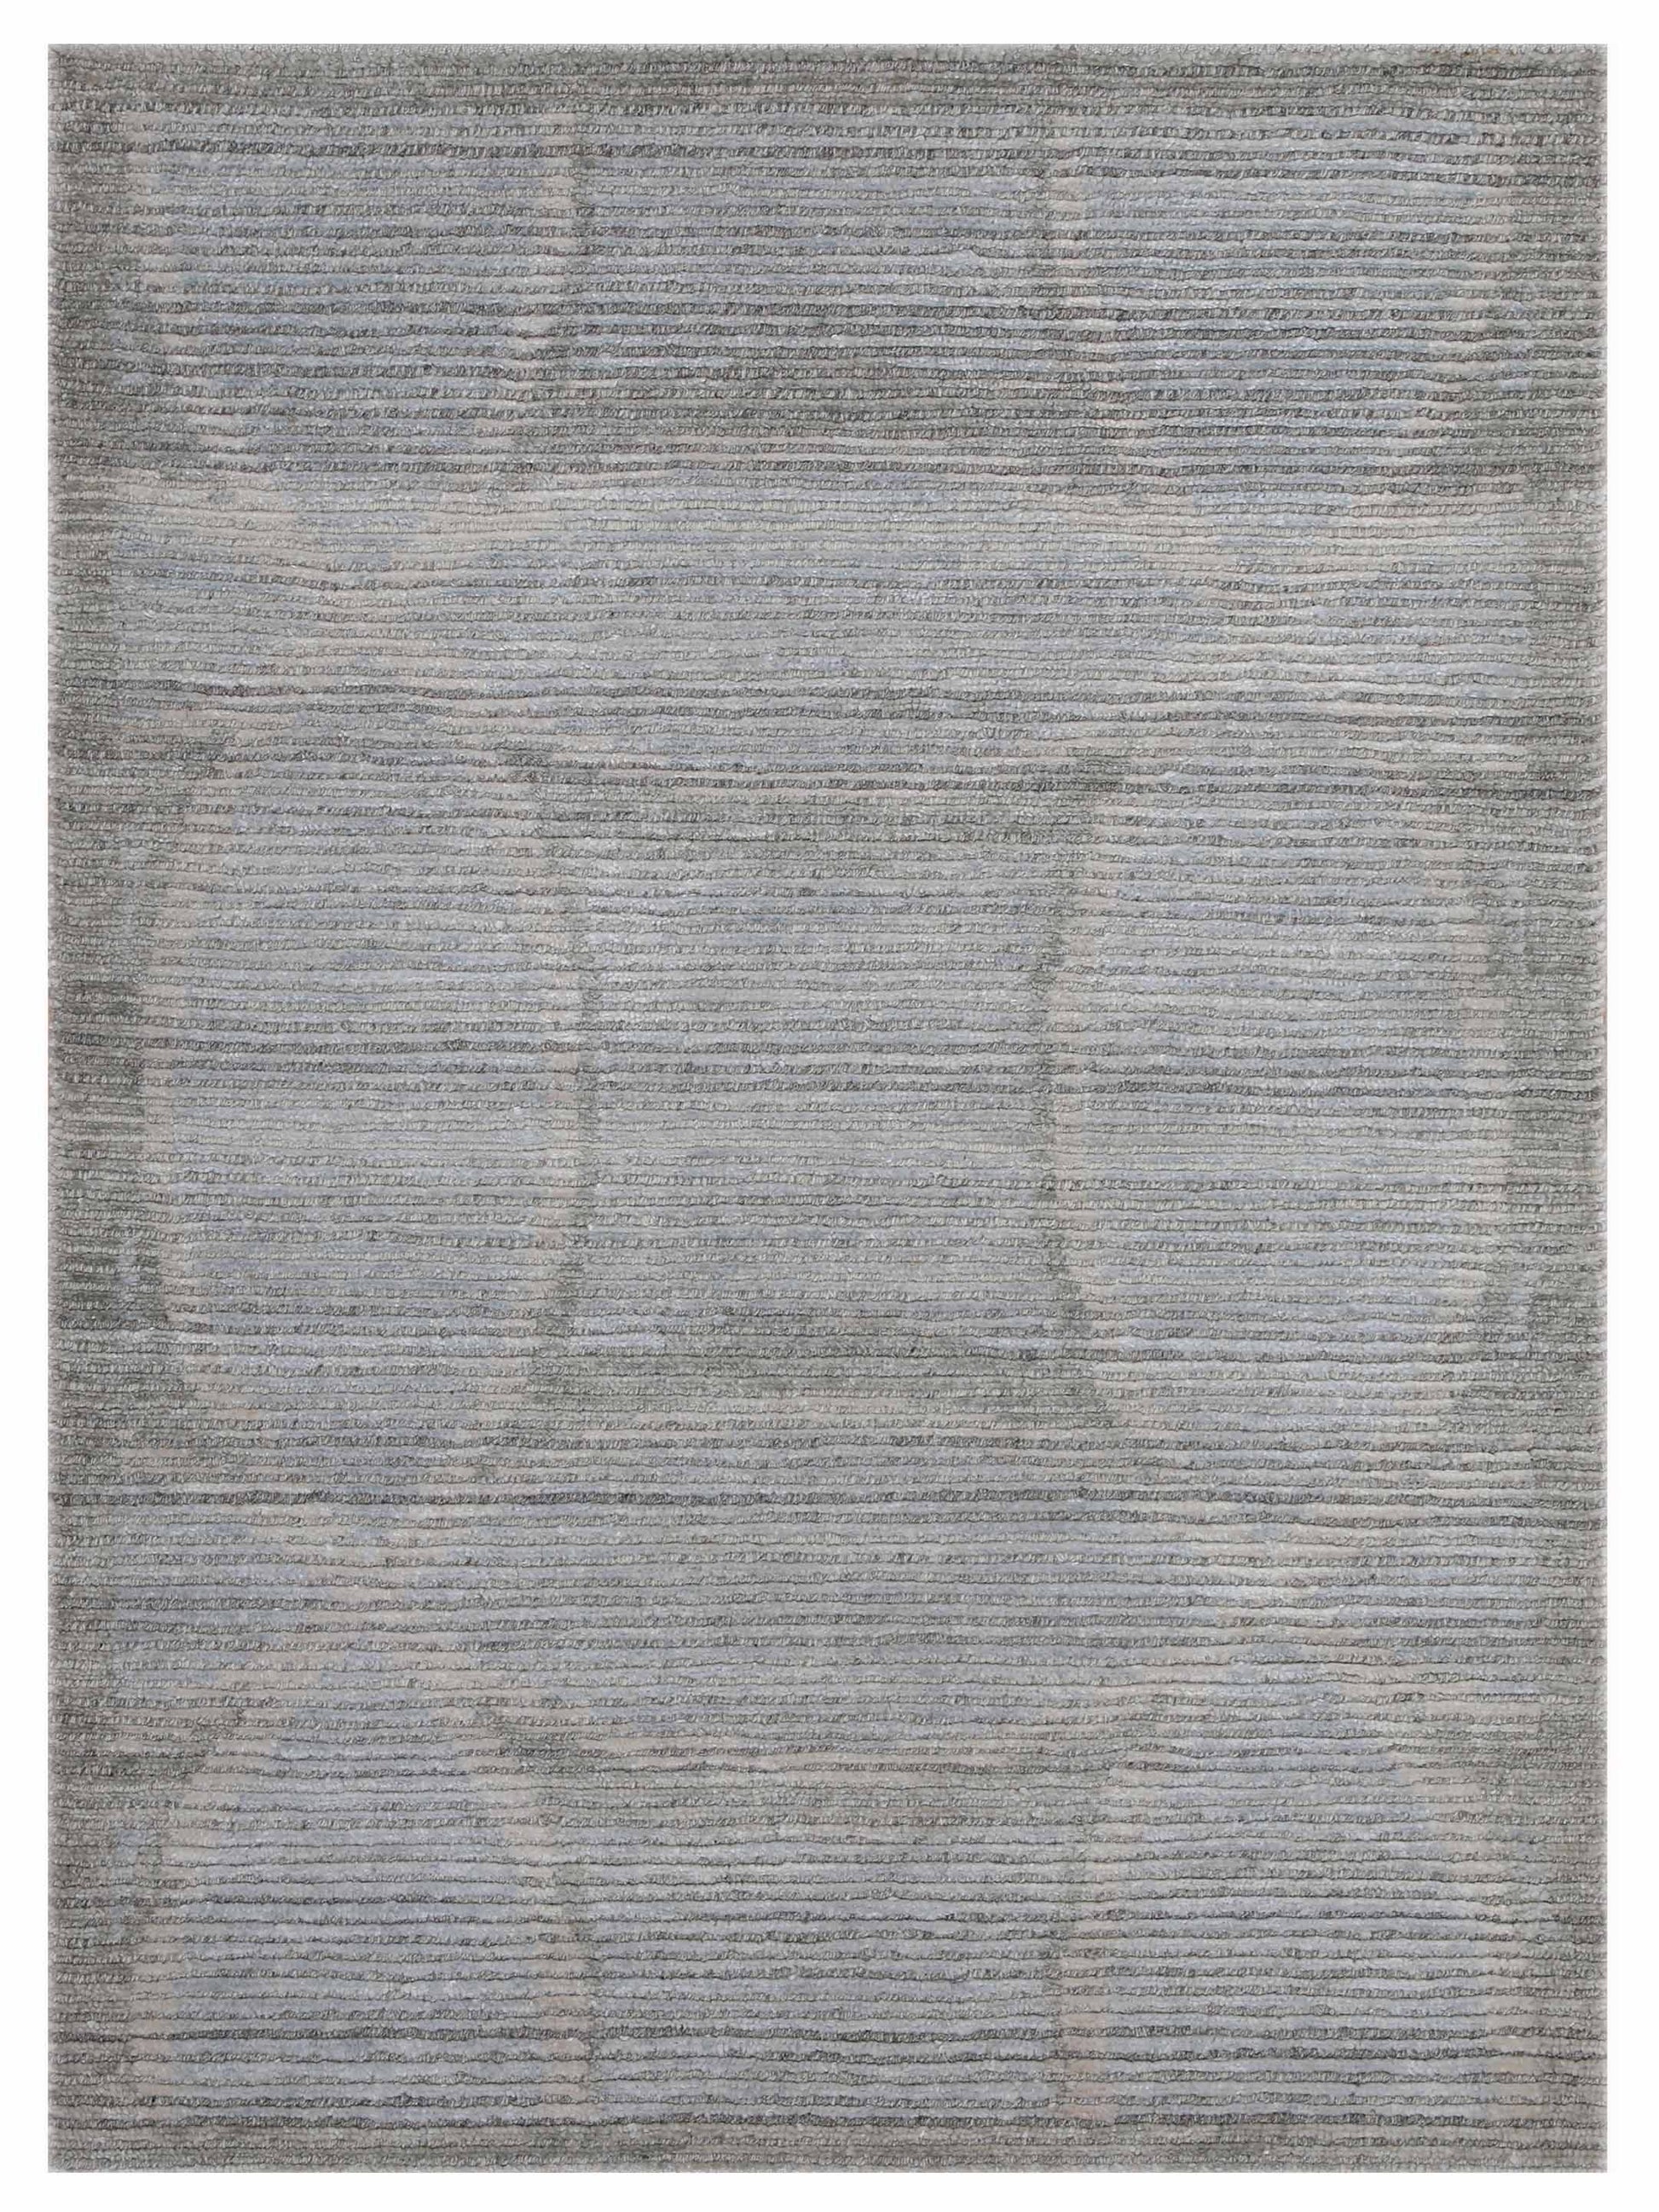 Artisan Mary MN-399 Sage Contemporary Knotted Rug